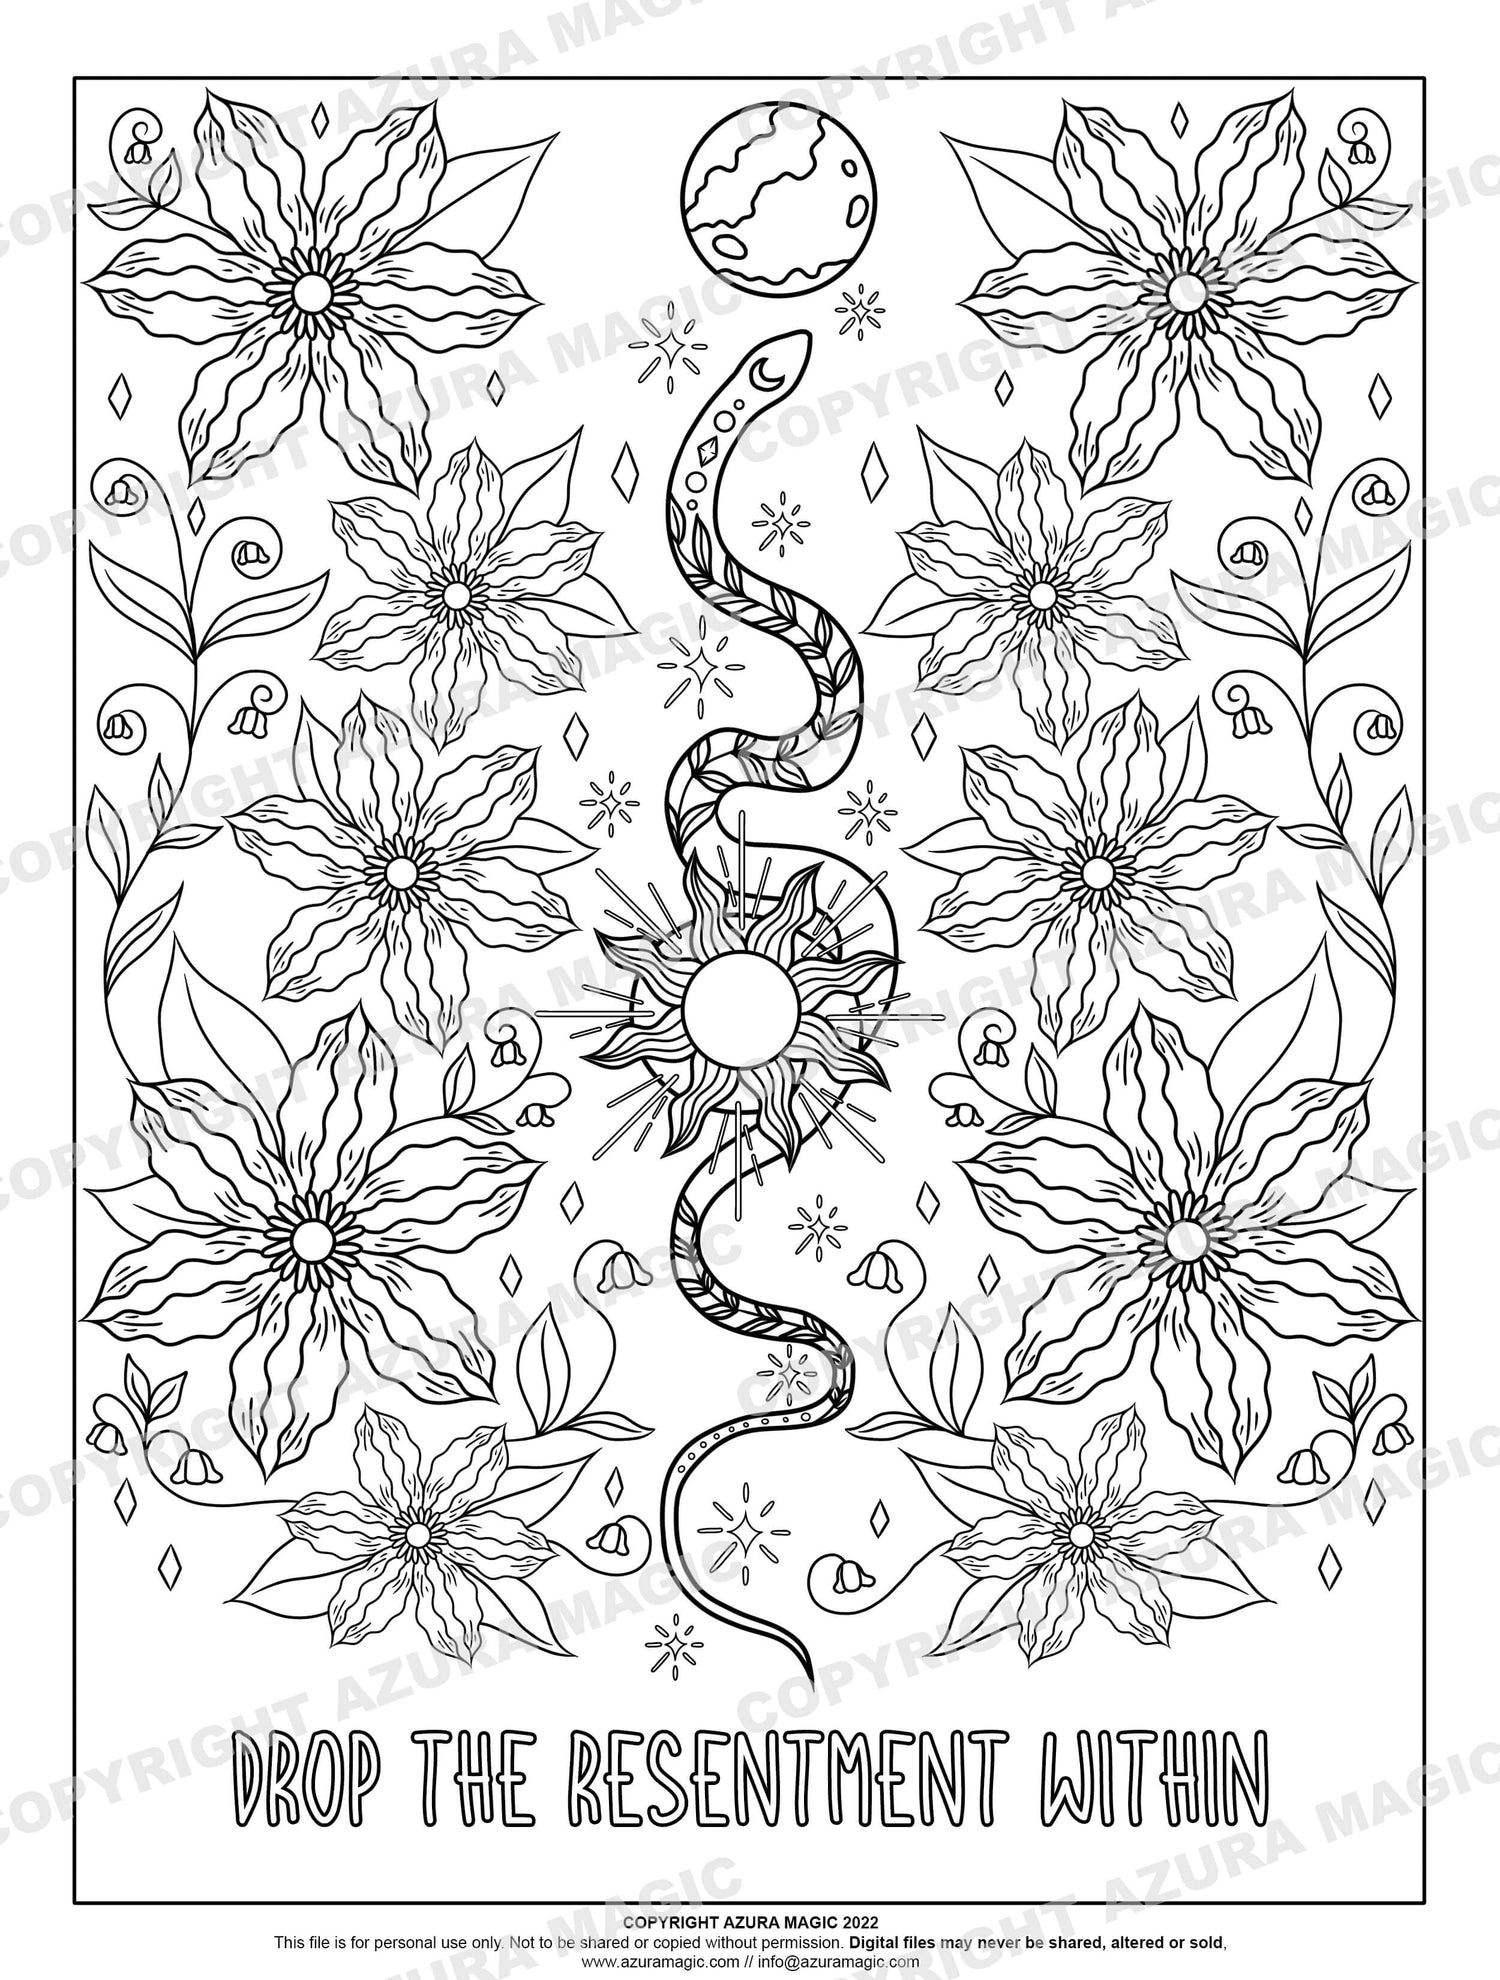 Path to Inner Path Coloring Book